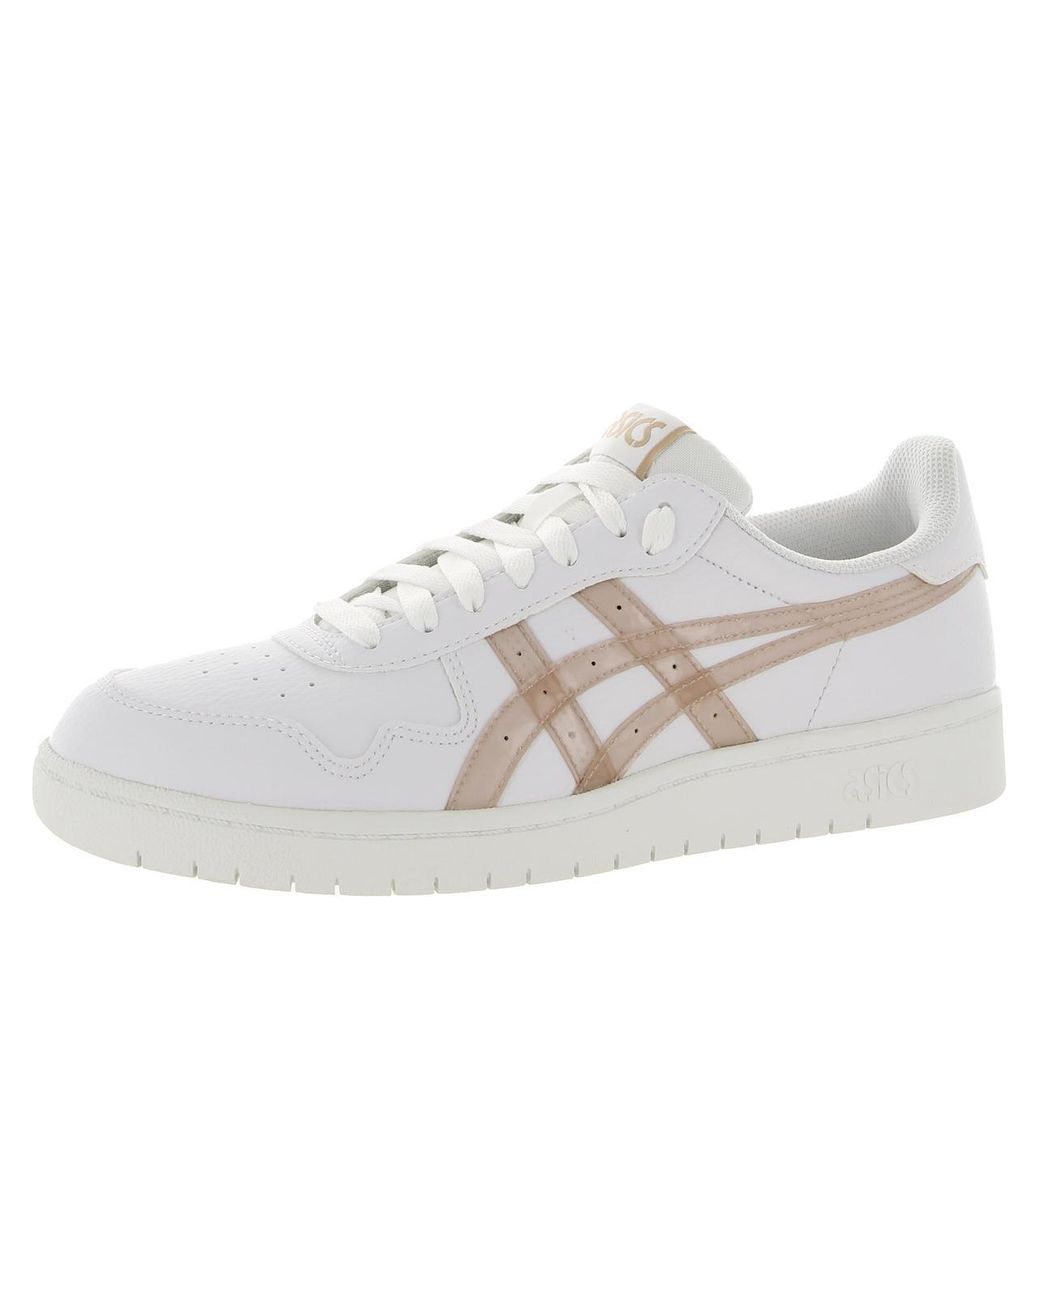 Asics Japan S Walking Lace-up Sneakers in White | Lyst